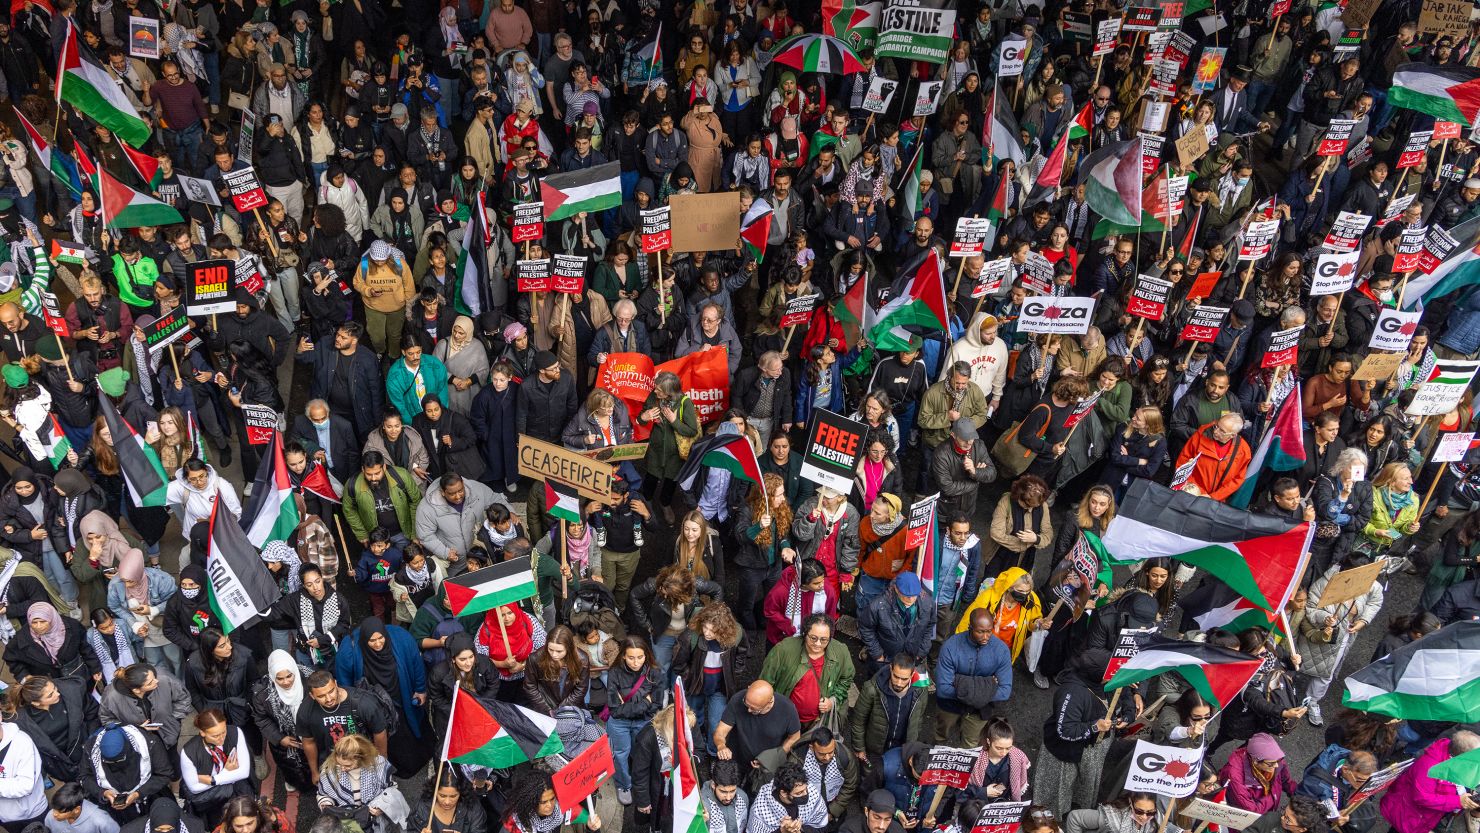 LONDON, UNITED KINGDOM - 2023/10/28: Tens of thousands of pro-Palestinian protesters march on the street during the demonstration urging an end to Israel's attacks in Gaza. Thousands have marched in support of Palestine demanding a ceasefire as Israeli forces continue to bombard Gaza. Israel's offensive is in response to Hamas's attack on Israel which resulted in some 1400 deaths. The death toll from Israeli attacks on densely-populated Gaza has already risen above 7000, with many civilians and children among the victims. (Photo by Phil Lewis/SOPA Images/LightRocket via Getty Images)